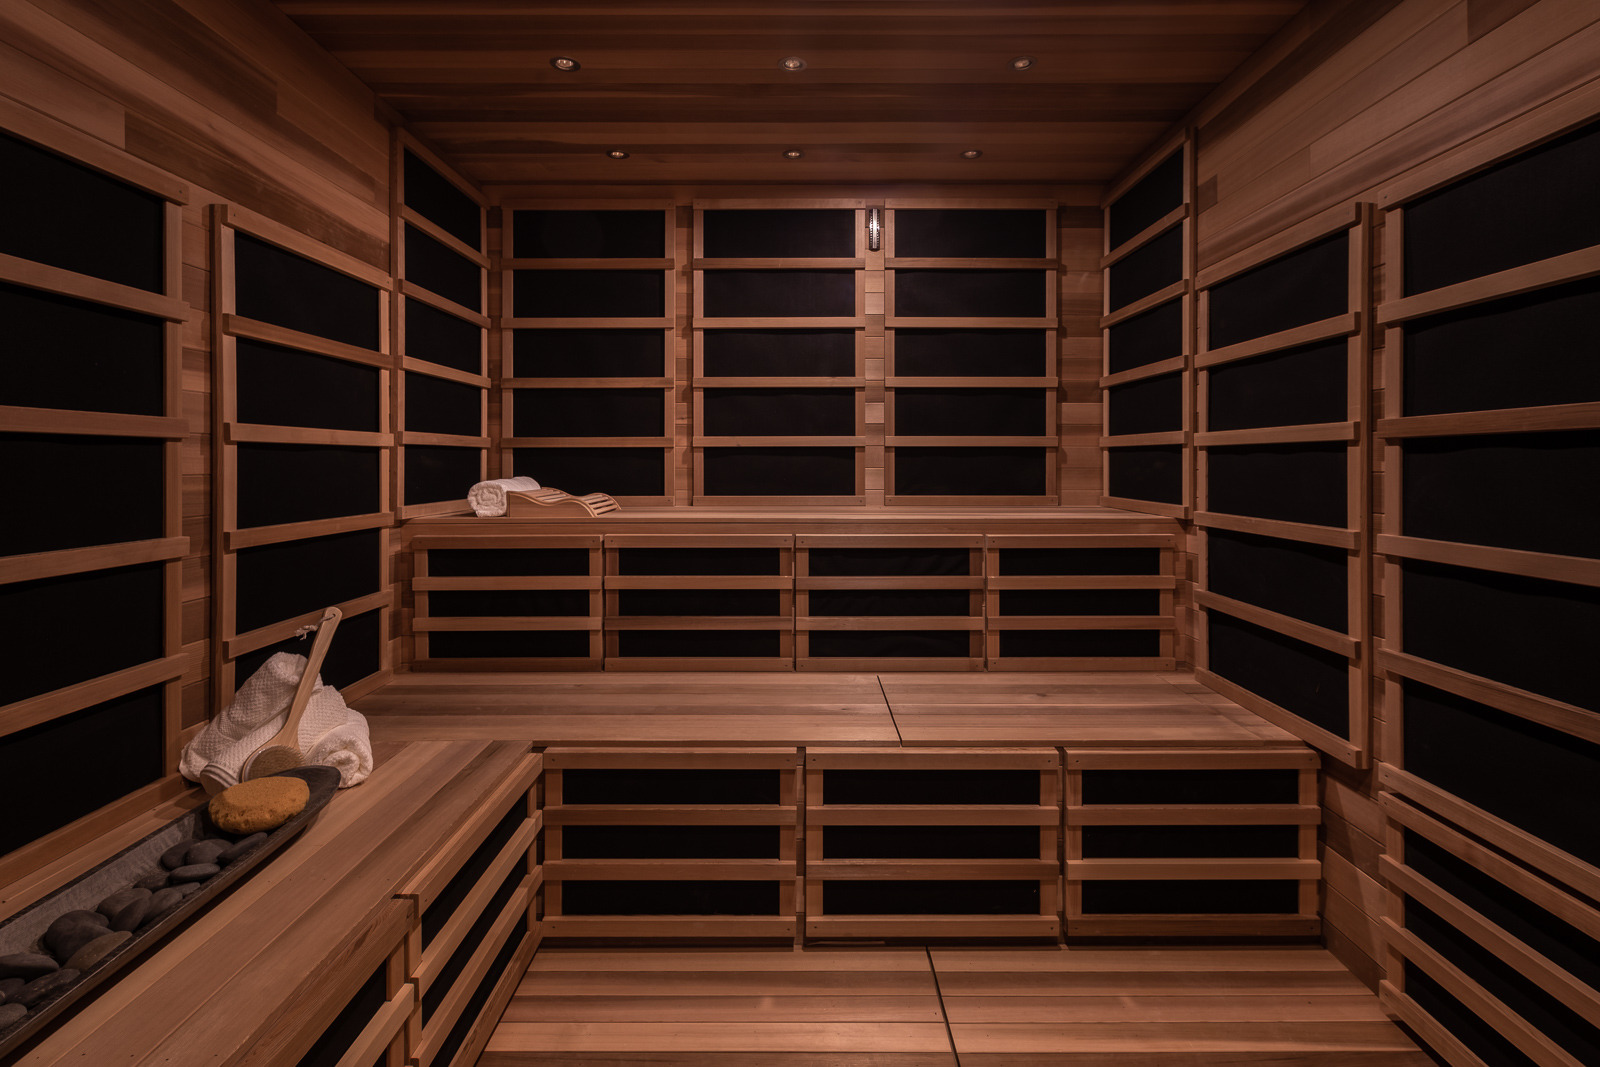 Wooden sauna interior with tiered empty seating, ready for a relaxing experience.